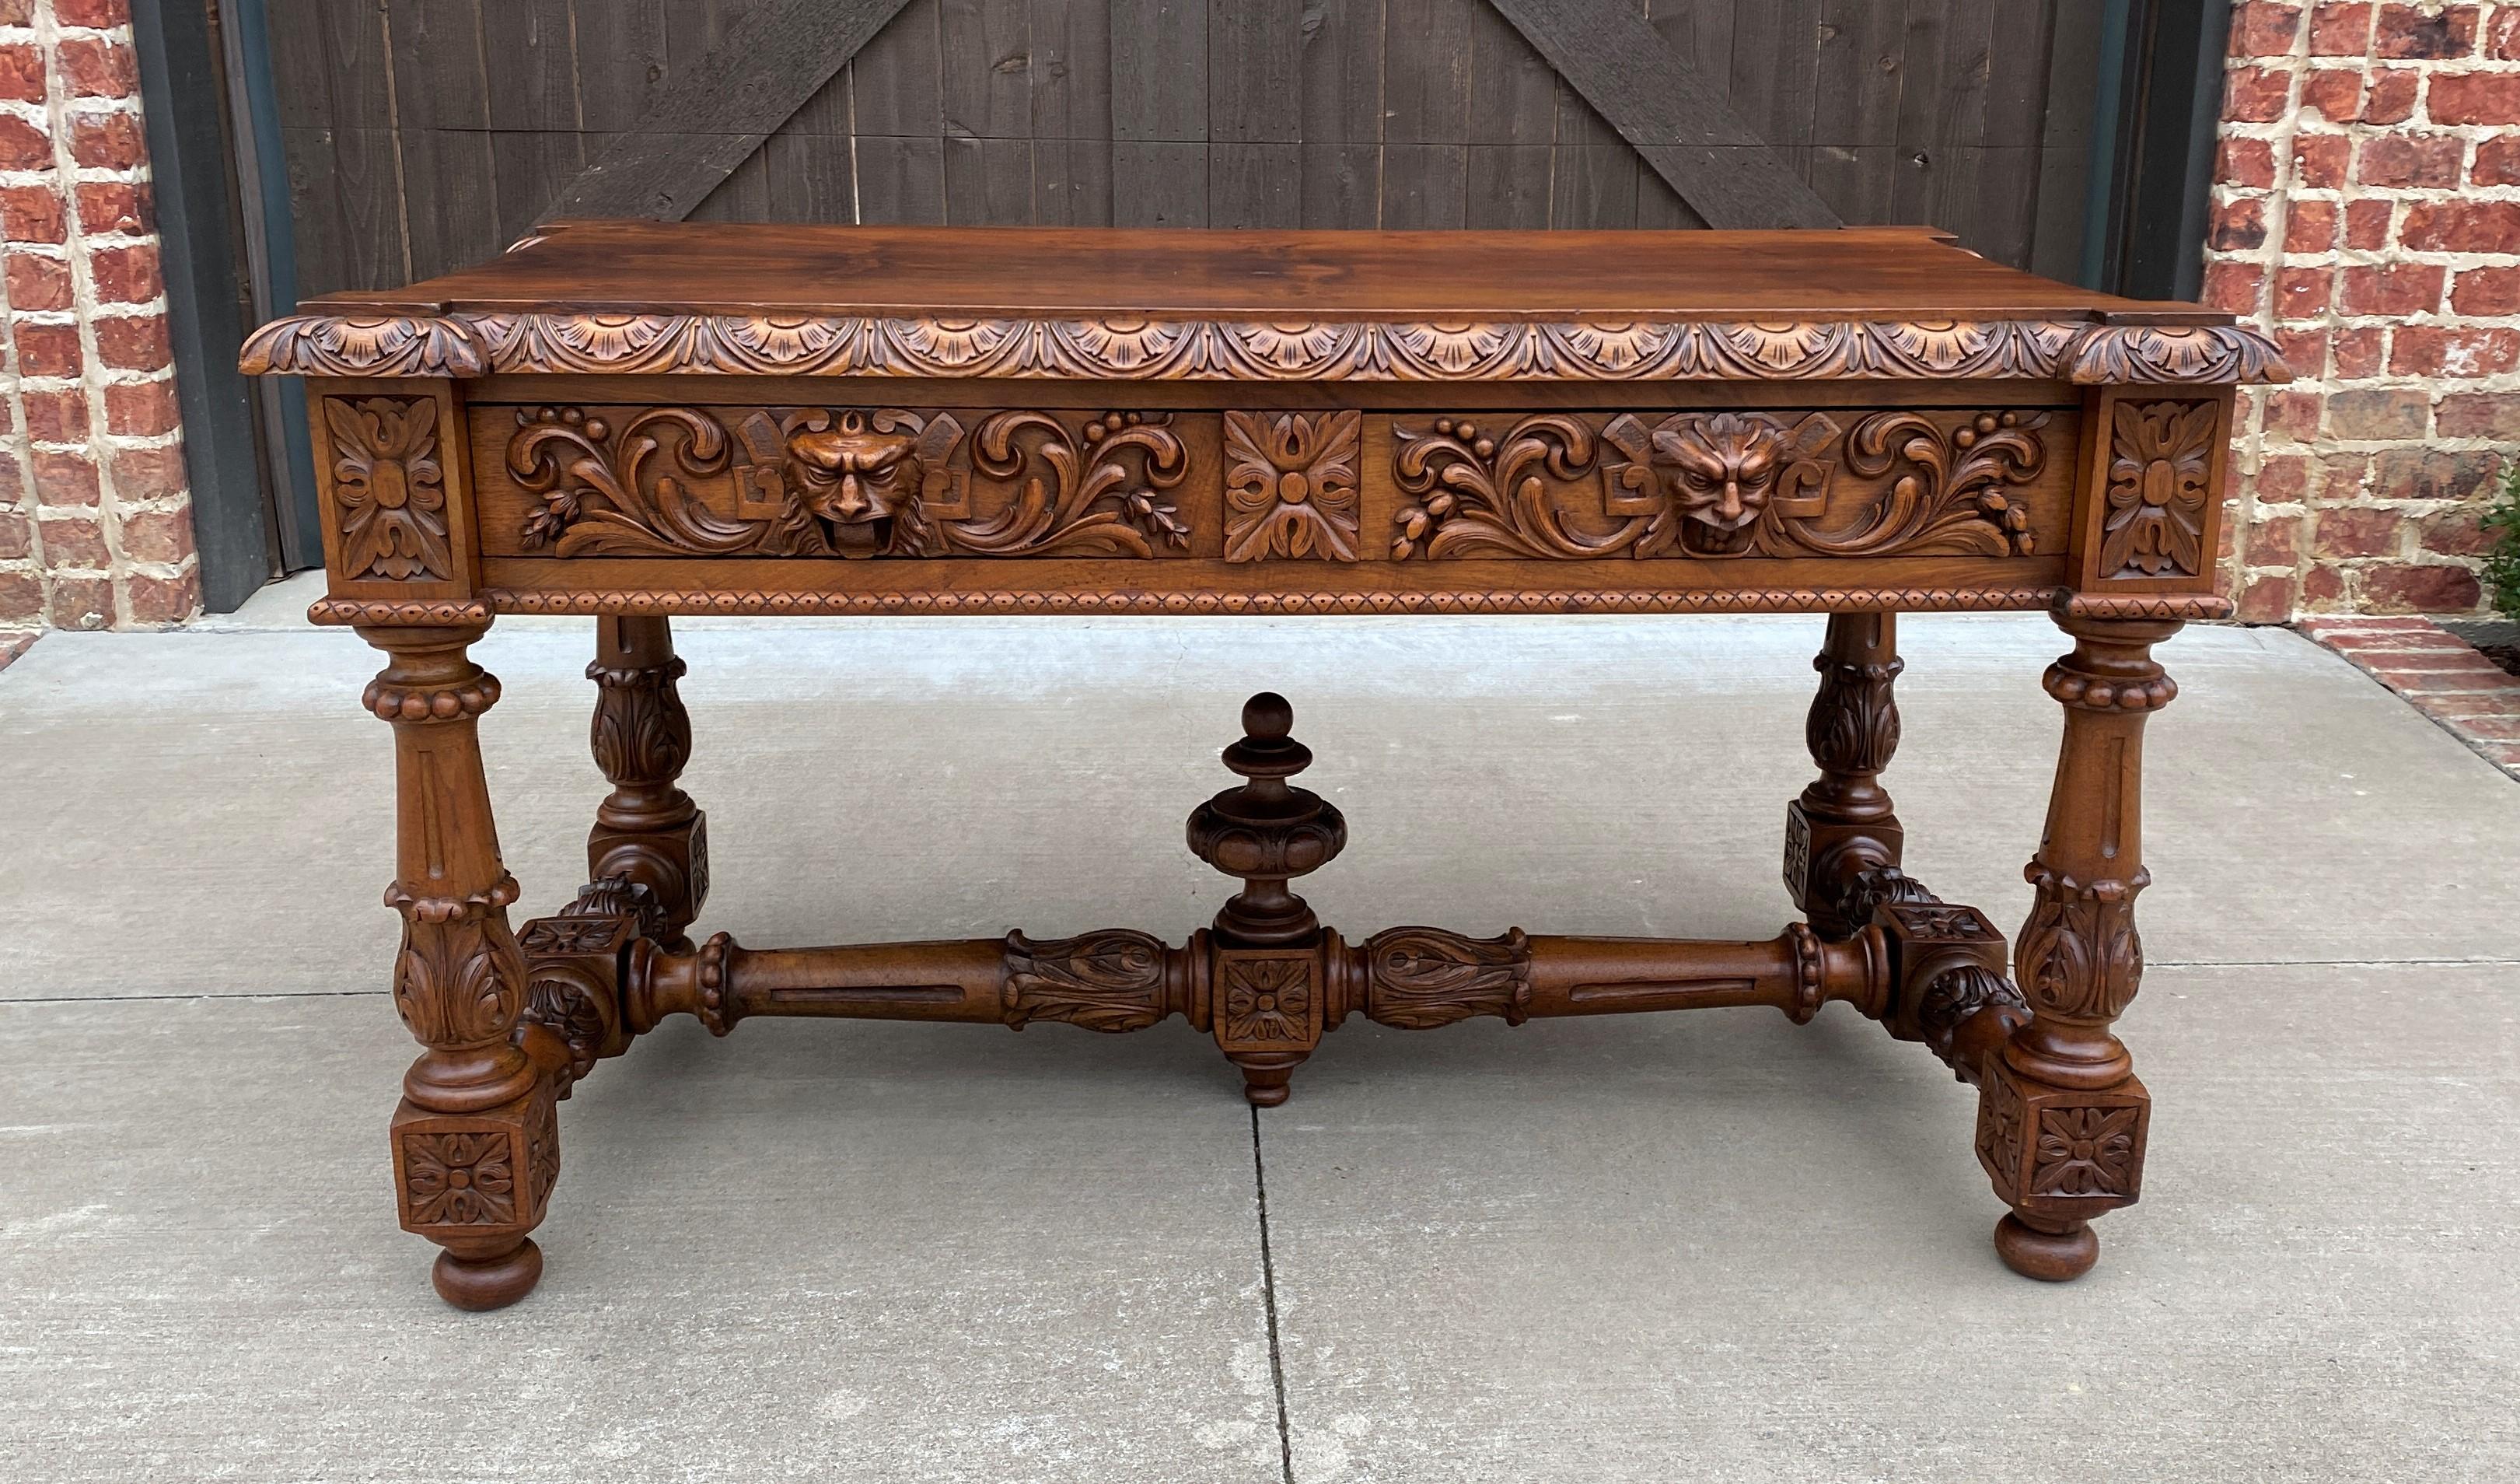 Stunning antique French walnut renaissance revival partners desk, writing table, conference or library table~~highly carved~~c. 1890s

 With so many people working from home , DESKS have become our most often requested items this year~~this is a